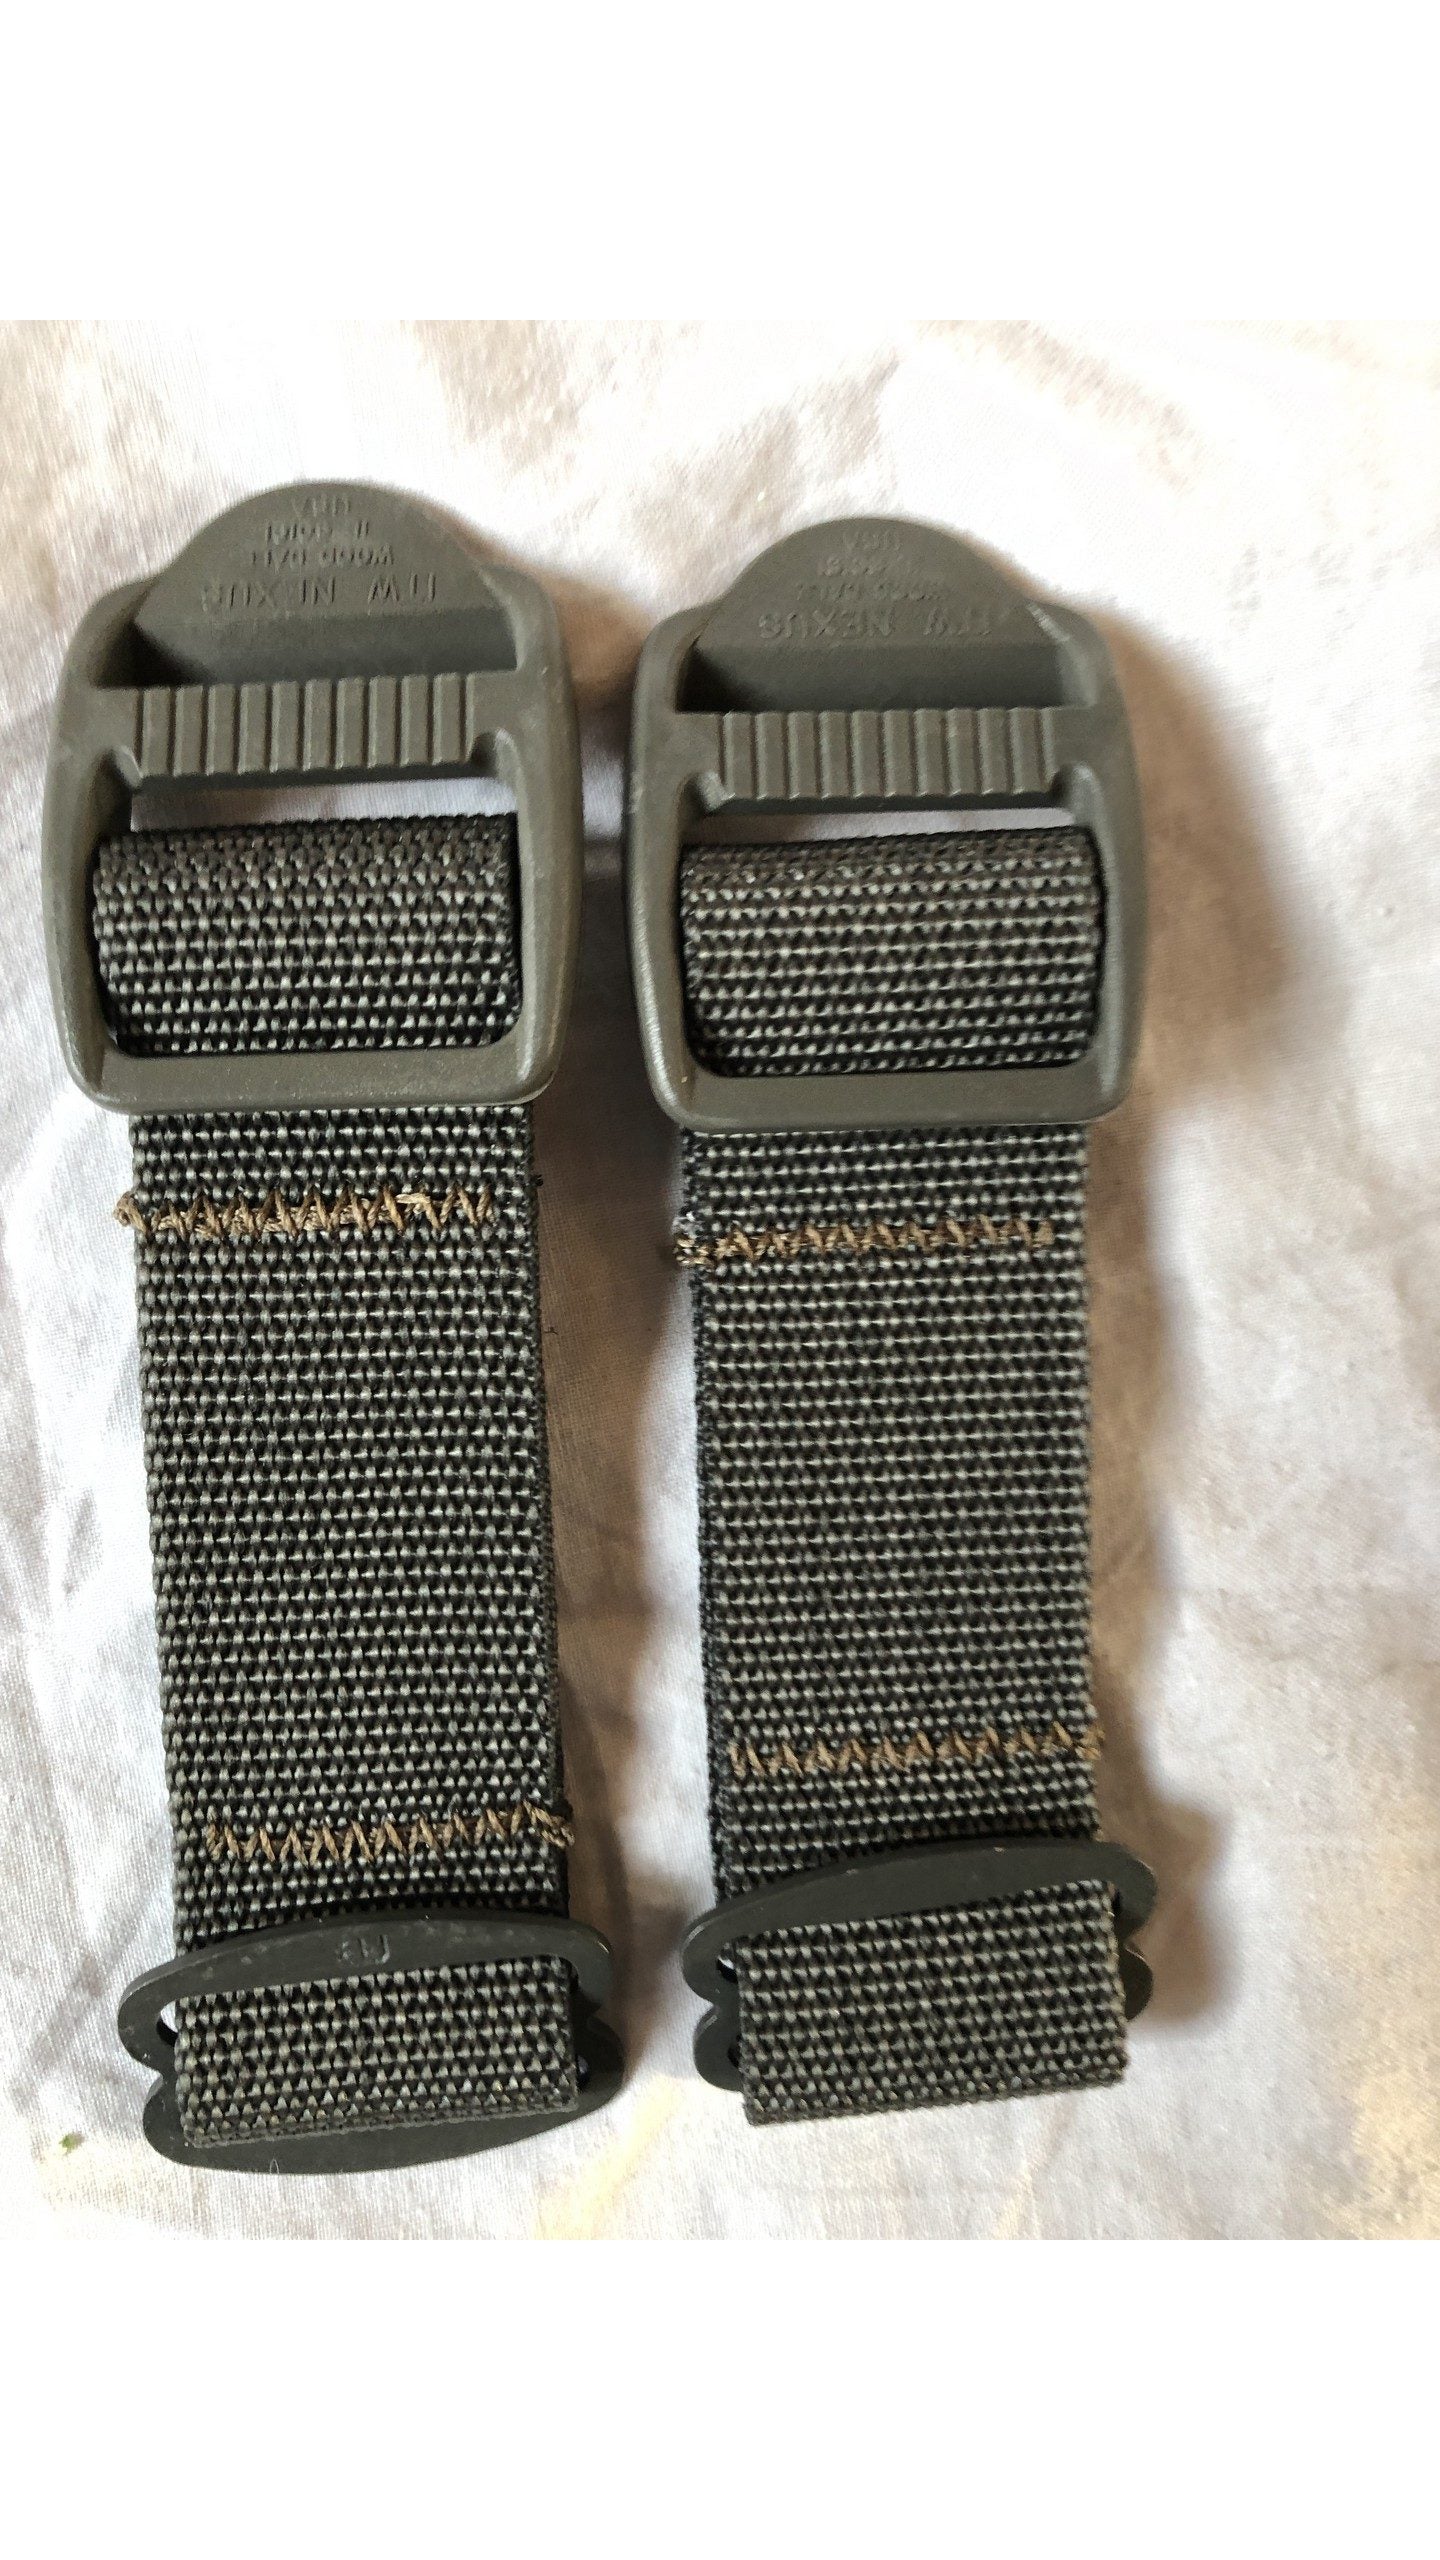 CUSTOM MULTICAM MOLLE BUCKLE, MALE SHOULDER QUICK RELEASE REPLACEMENT -  LockNWalkHarness